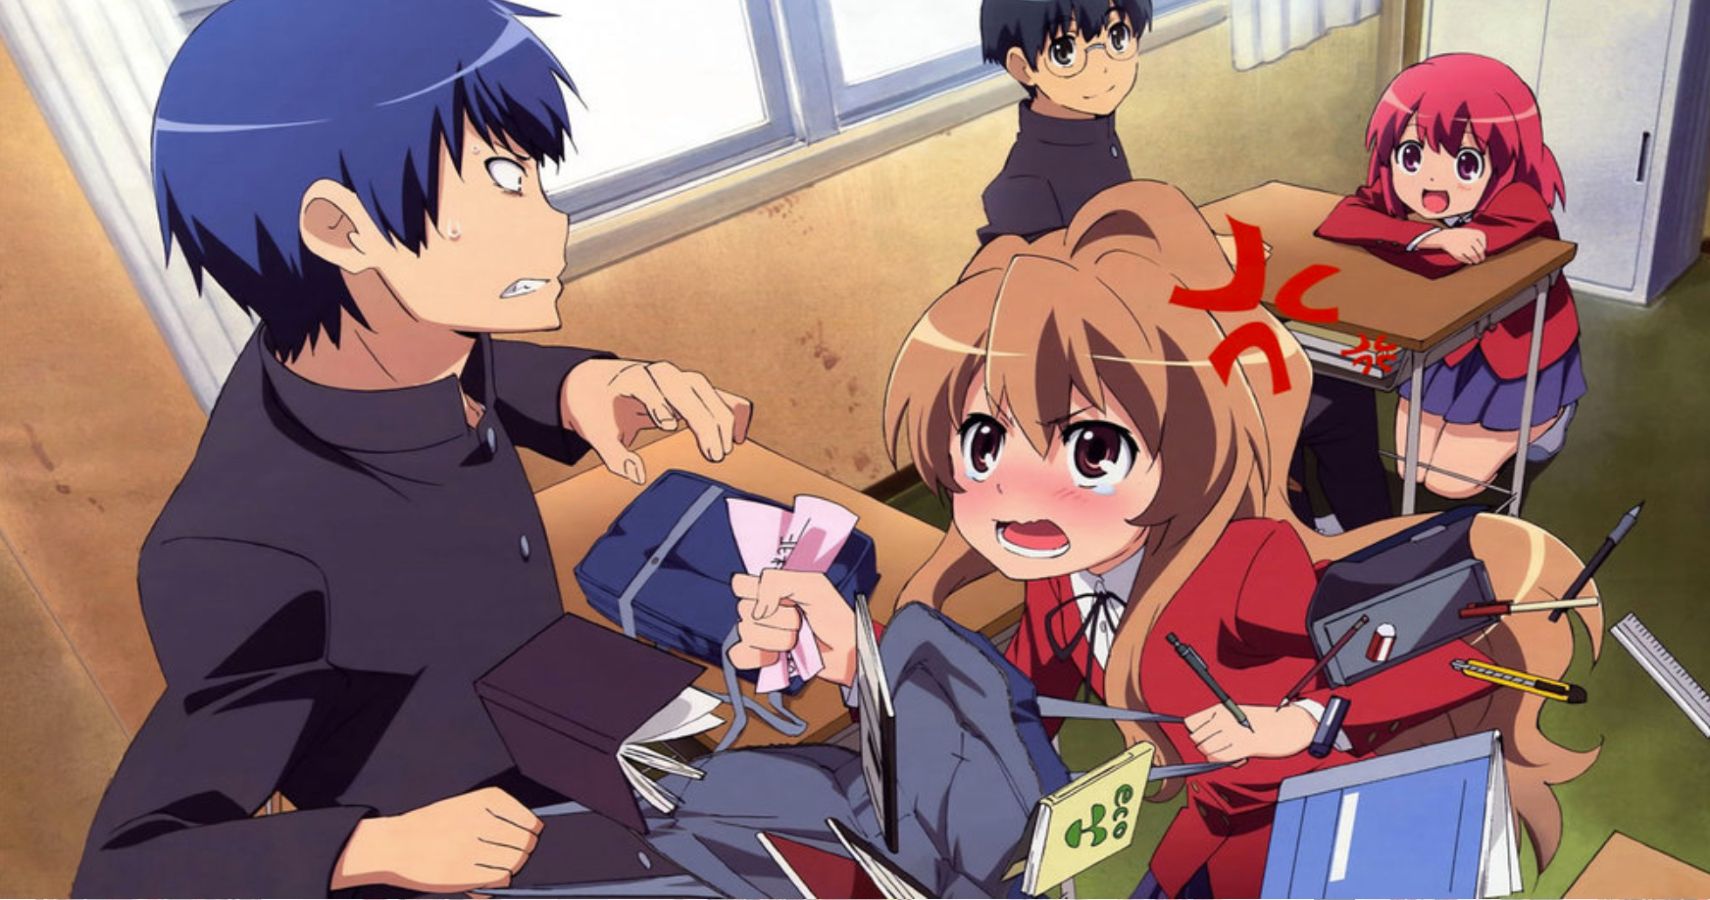 The Top 10 Toradora Episodes Ranked According To Imdb Cbr Toradora! is the 25th and final episode of toradora! toradora episodes ranked according